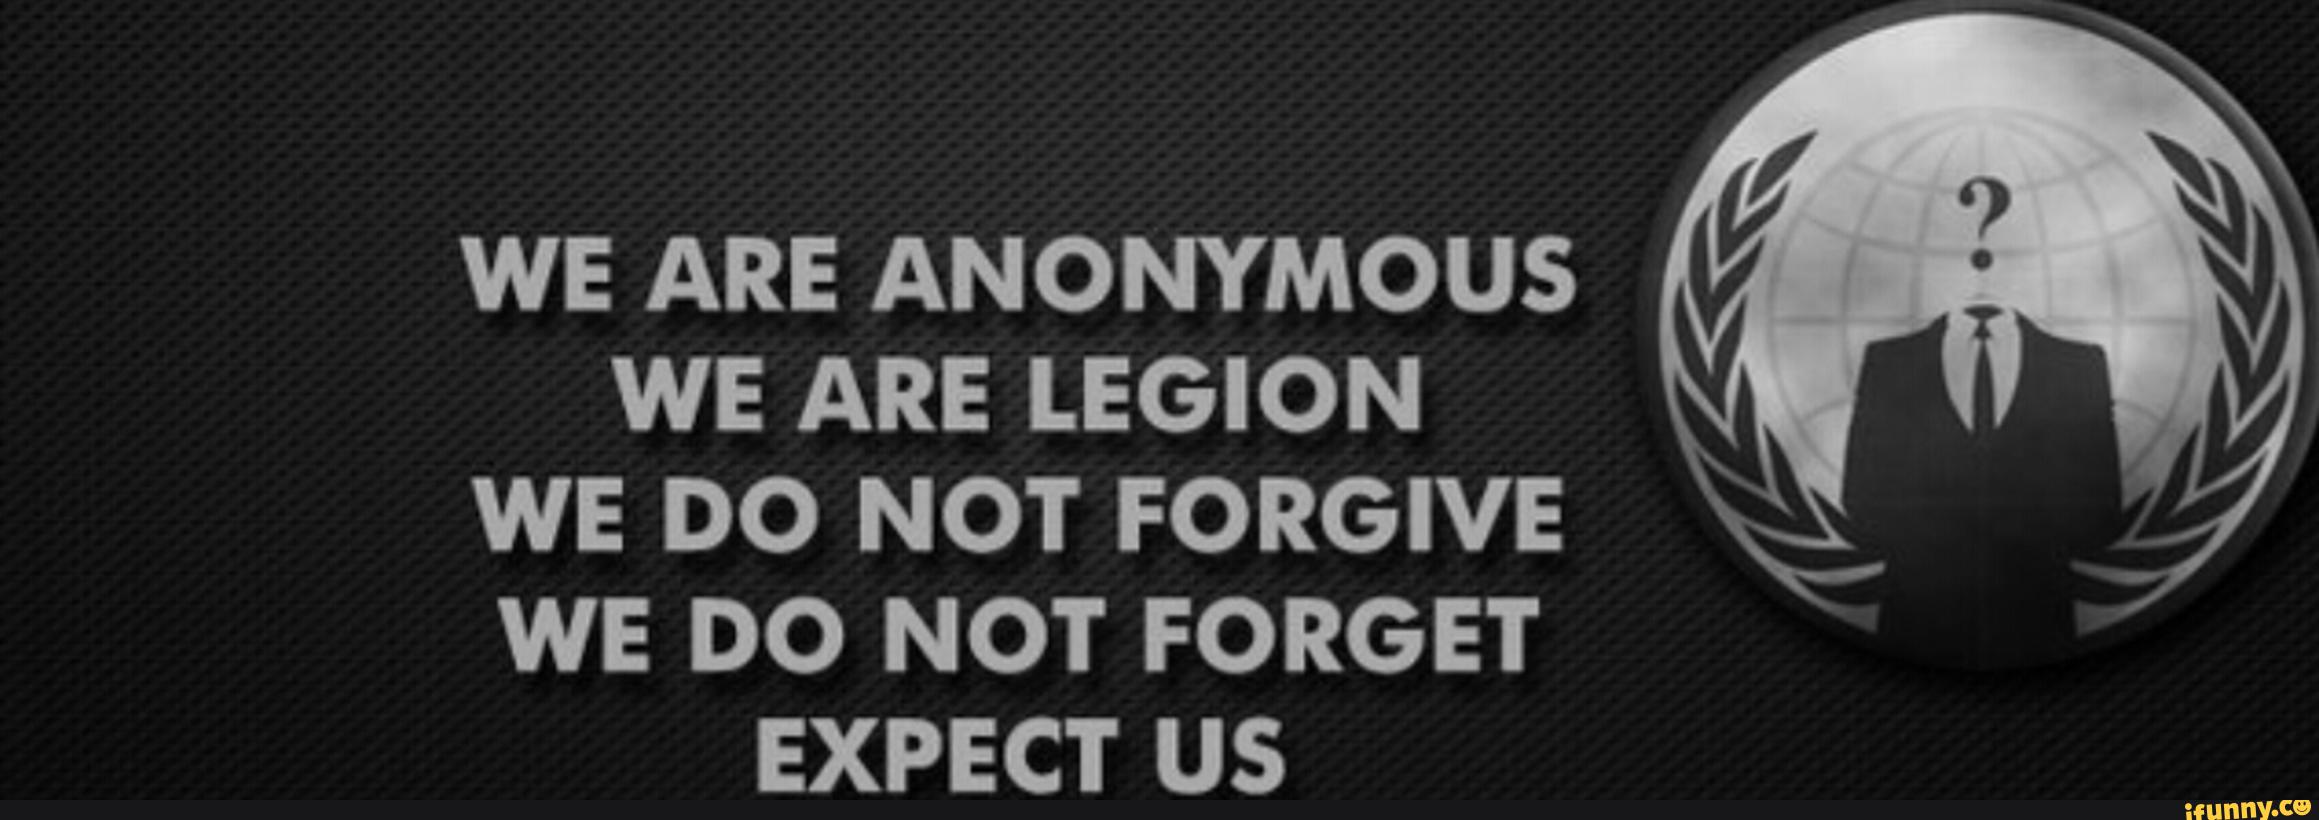 We Are Anonymous We Are Legion We Do Not Forgive We Do Not Forget Expect Us Ifunny